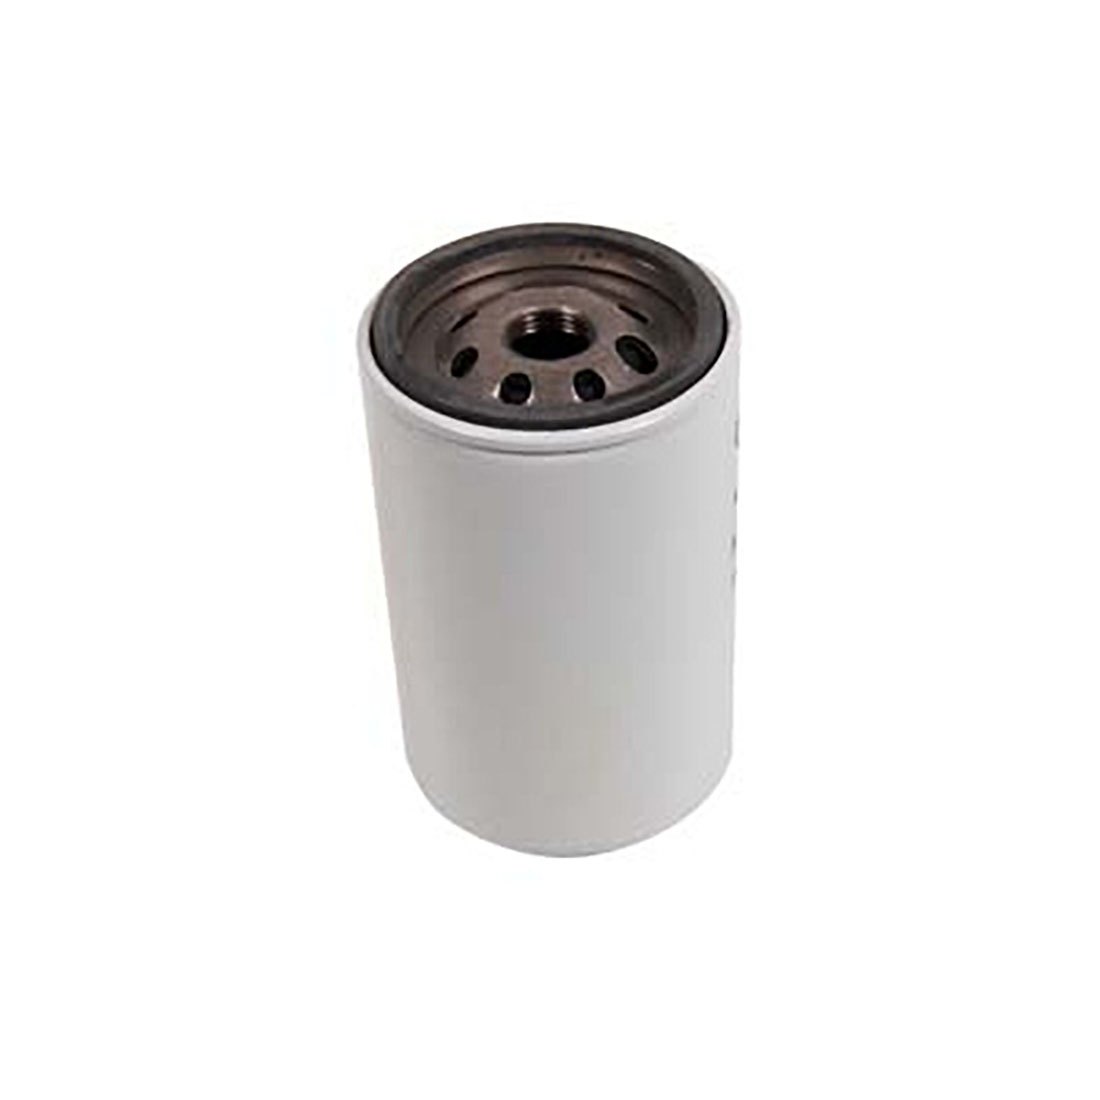 Oil Filter For V6 and V8 Engines 18mm X 1.5 thread